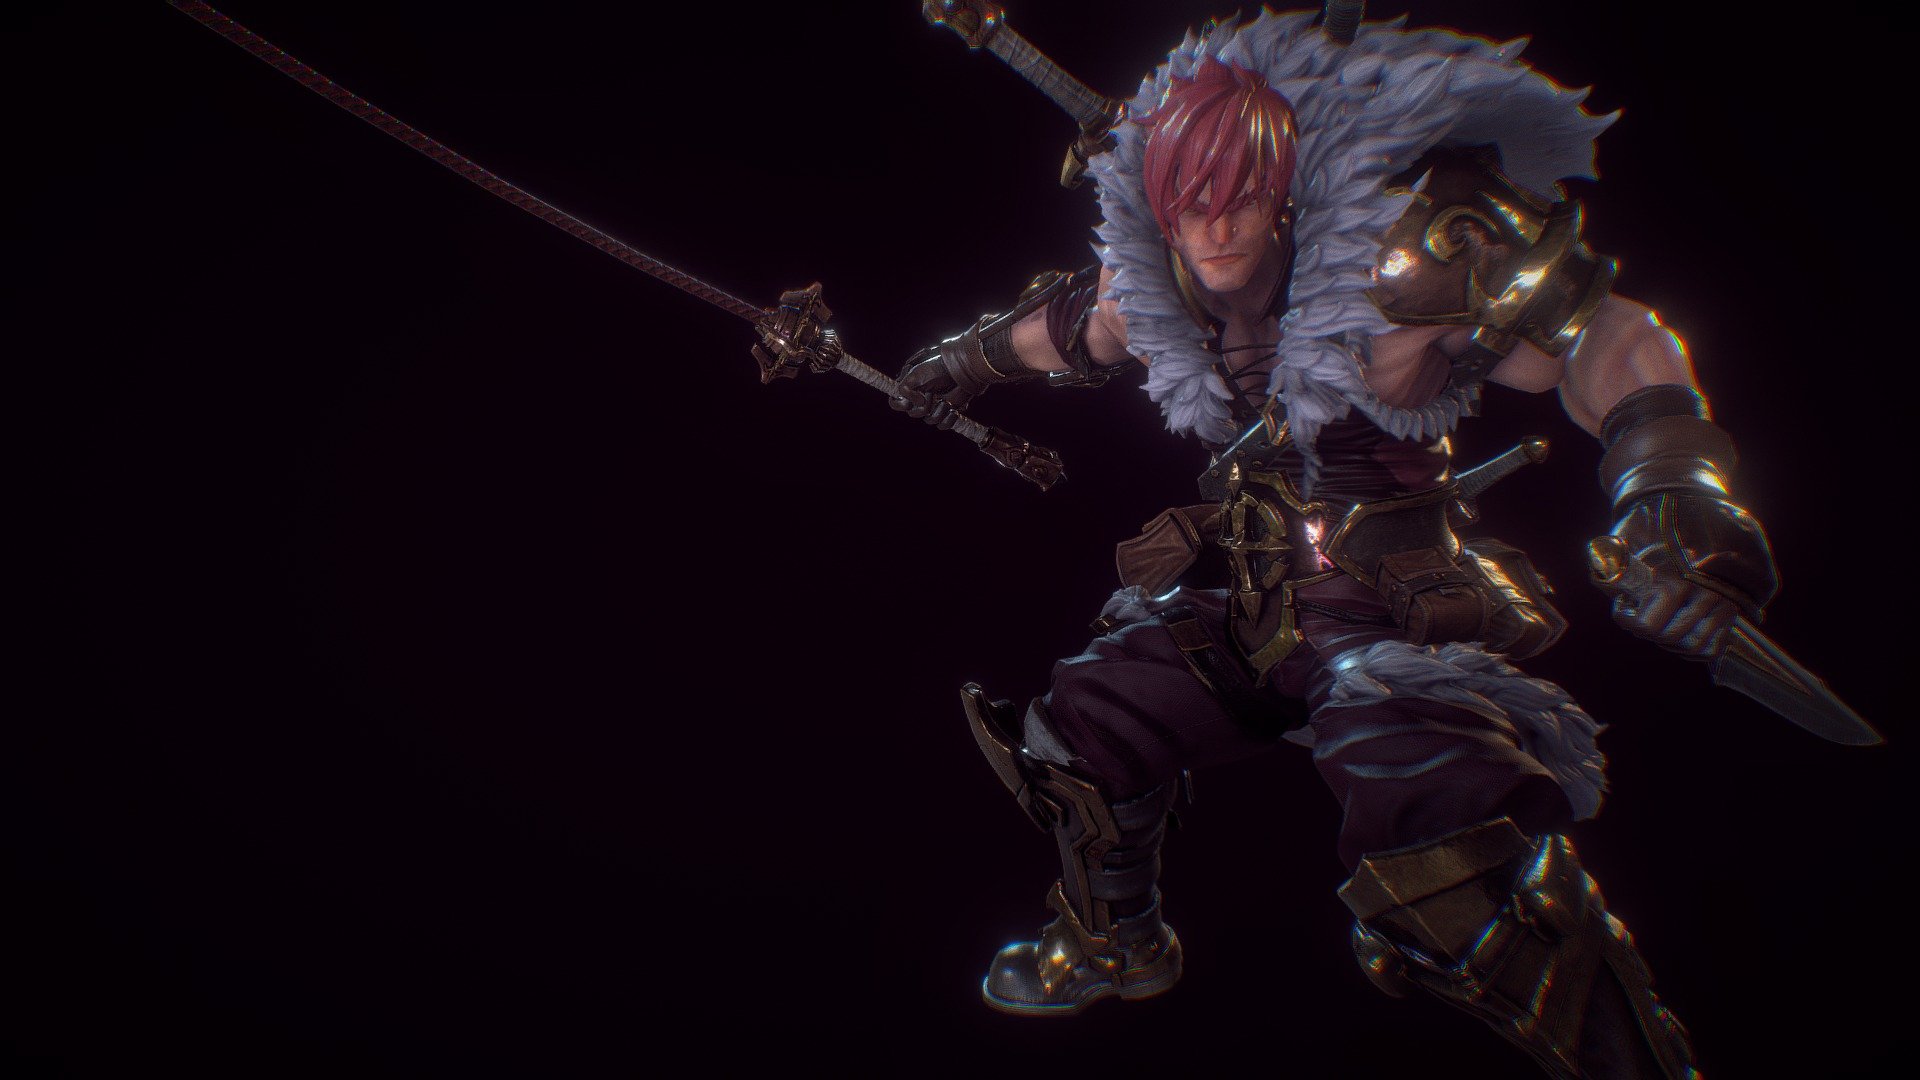 Hello everybody!

This is my latest work Simon belmont from Castlevania based on Joe Madureira's awesome concept.

Concept link:

https://www.instagram.com/p/zv0Phws0M_/?taken-by=joemadx

check-out artstation for more renders and HD version:

https://www.artstation.com/isaiaskiister 

Hope you guys like it! - Castlevania Simon Belmont - 3D model by kiister07 3d model